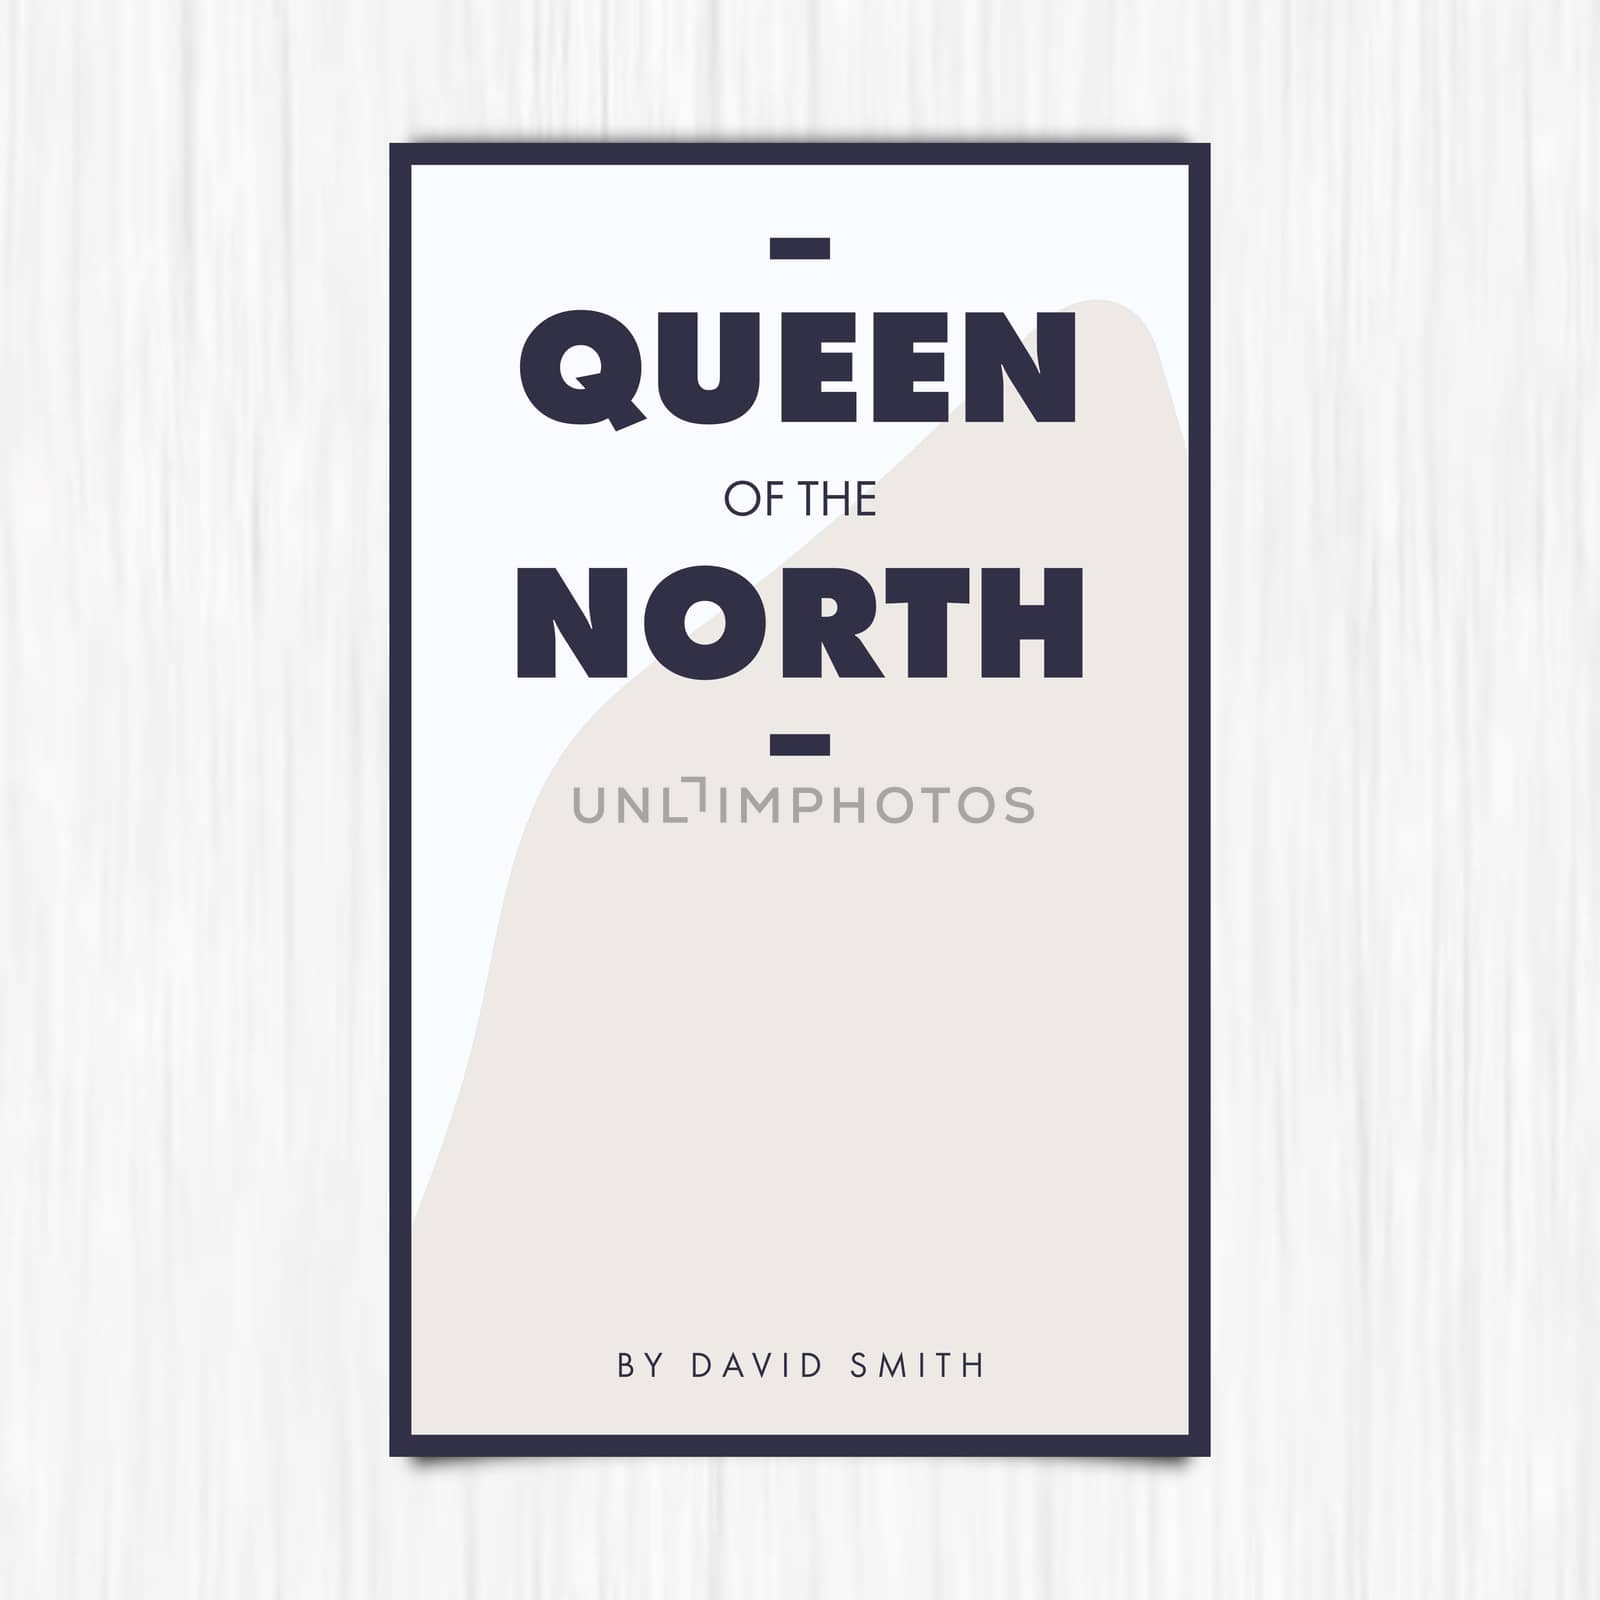 Vector of novel cover with queen of the north text against white background